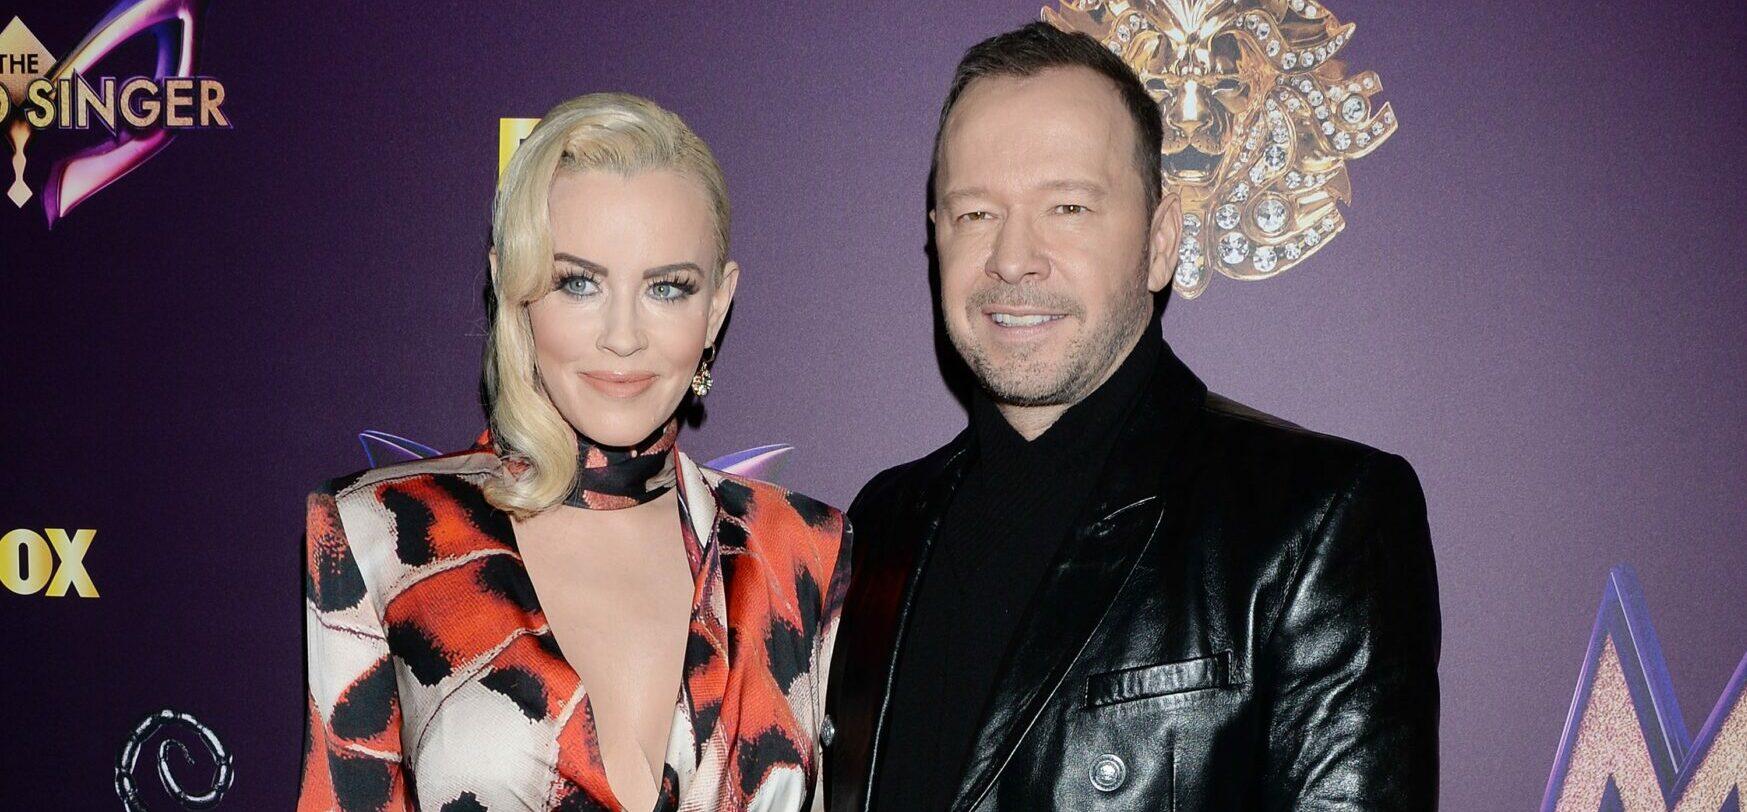 Jenny McCarthy And Donnie Wahlberg Have A ‘Sandy & Danny’ Kind Of Love